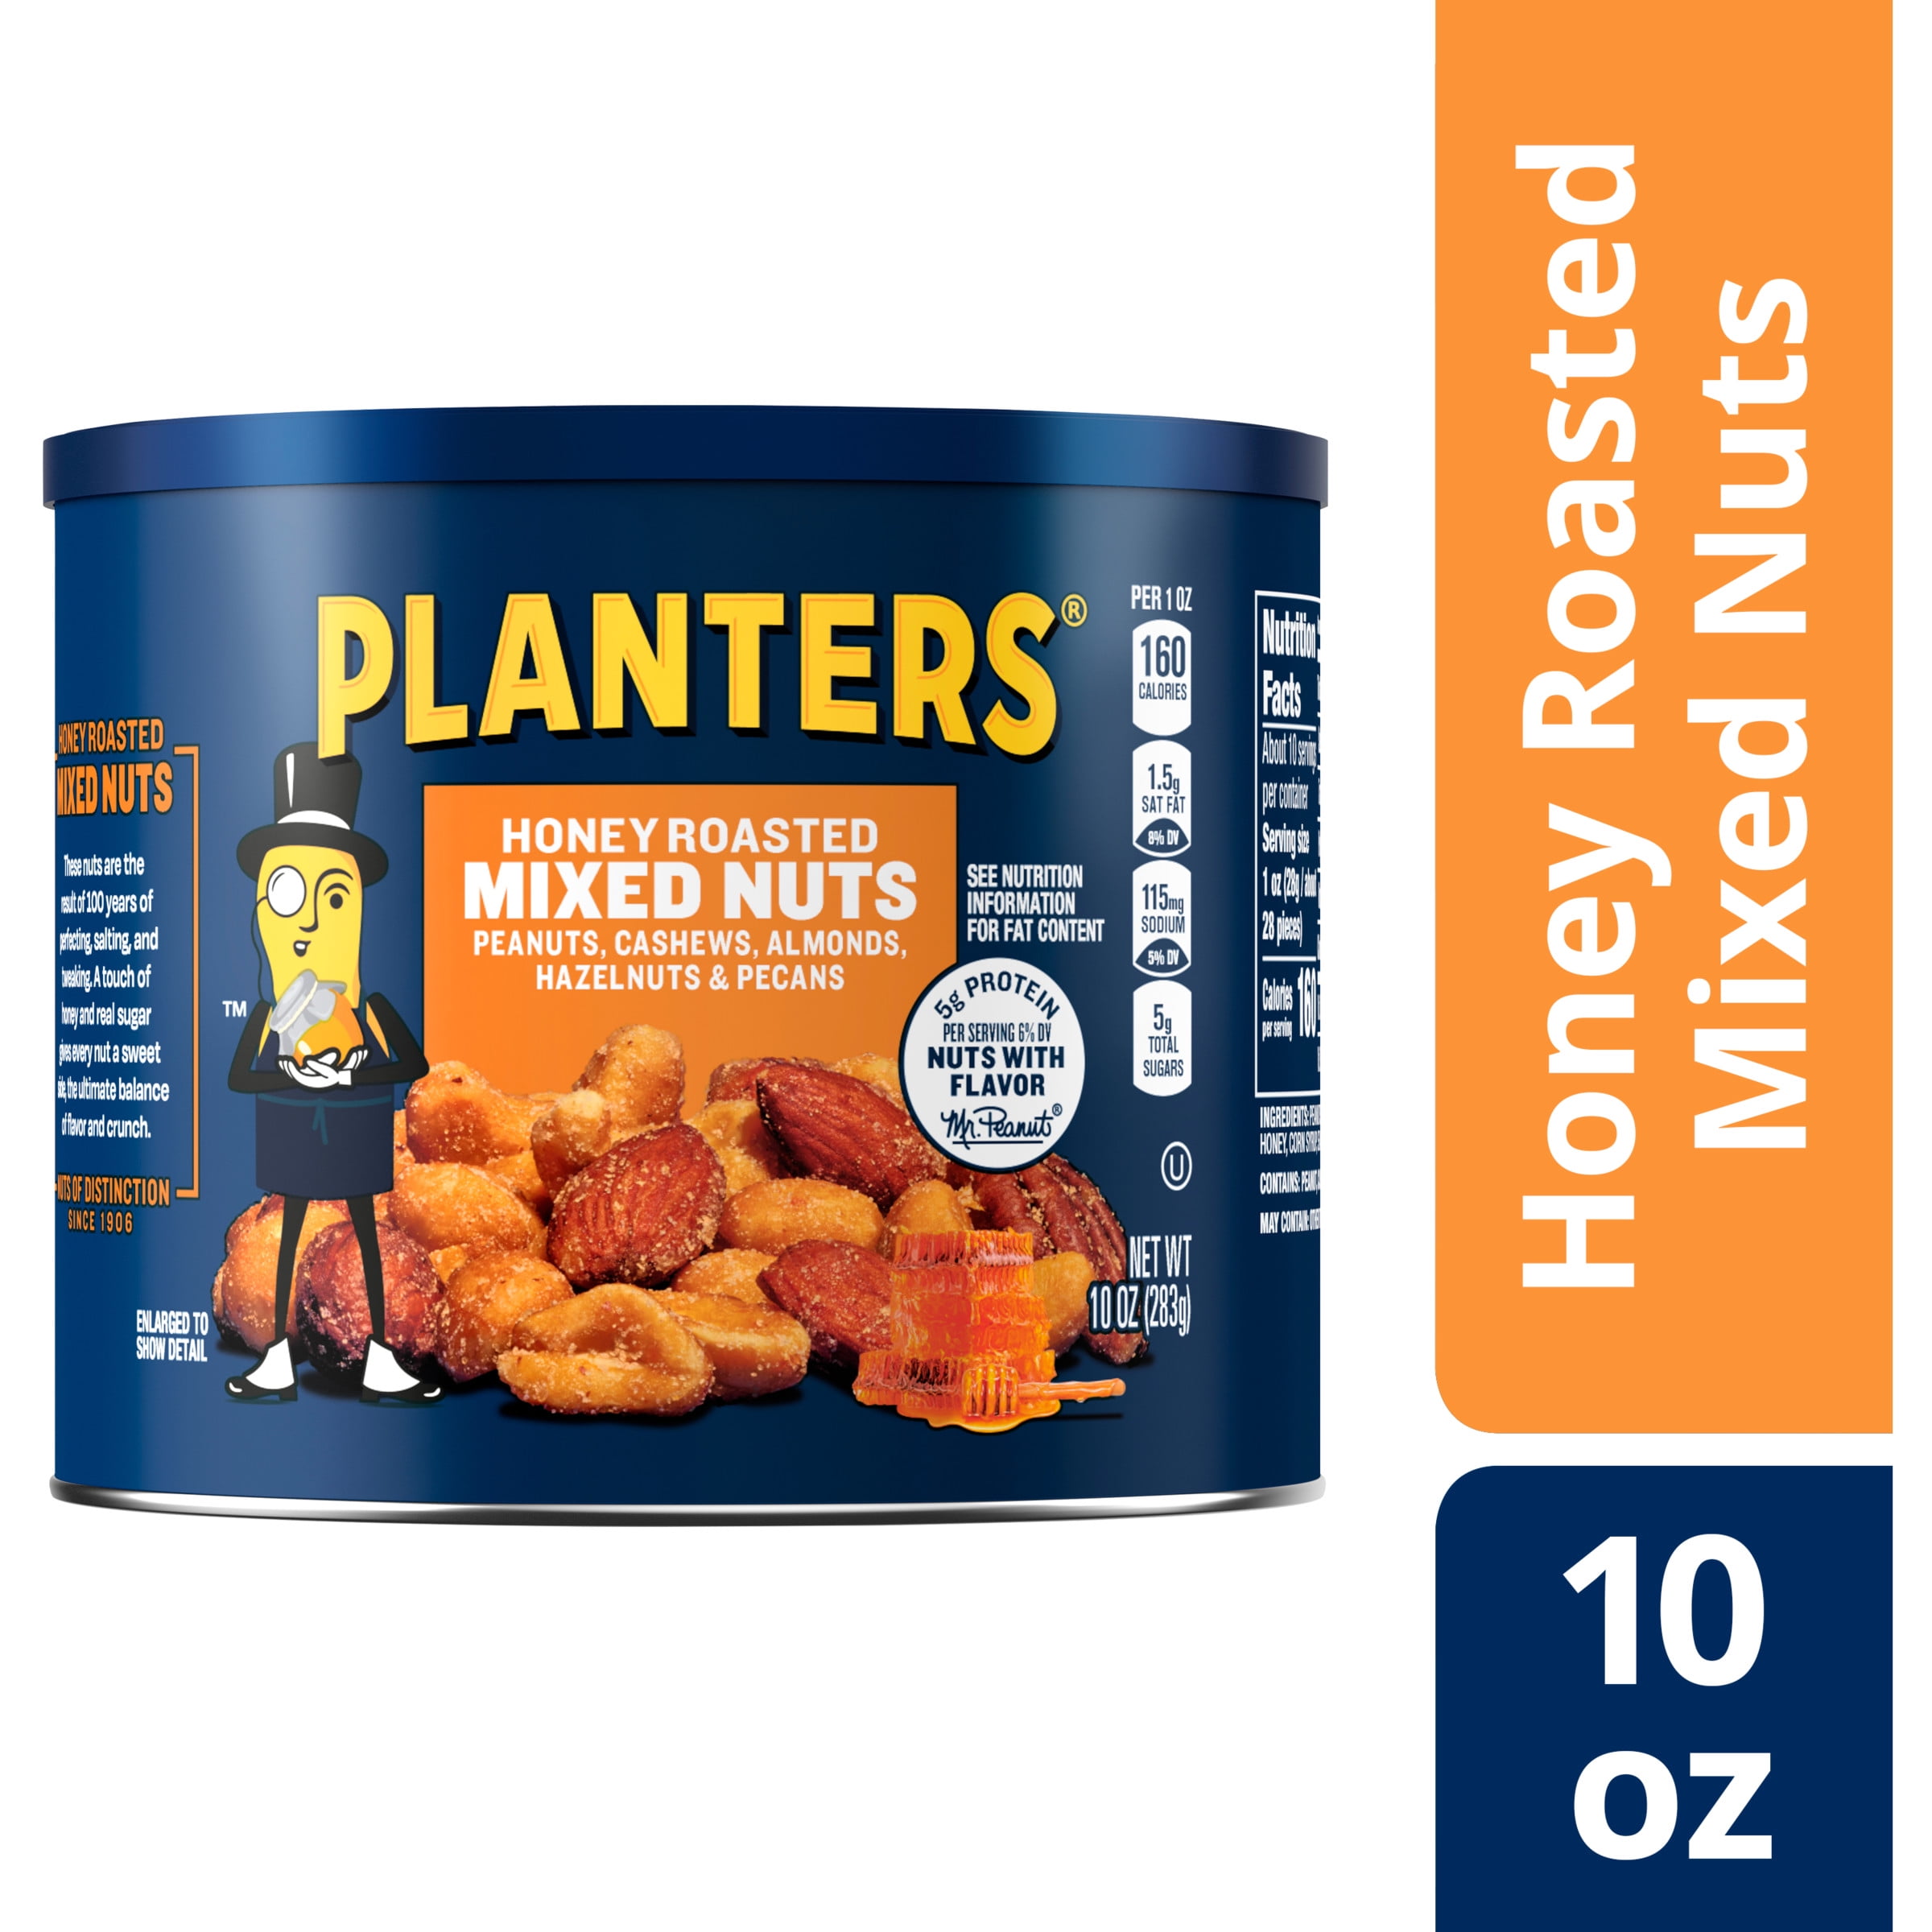 Binny's Honey Roasted Mixed Nuts (Pop Top Can)